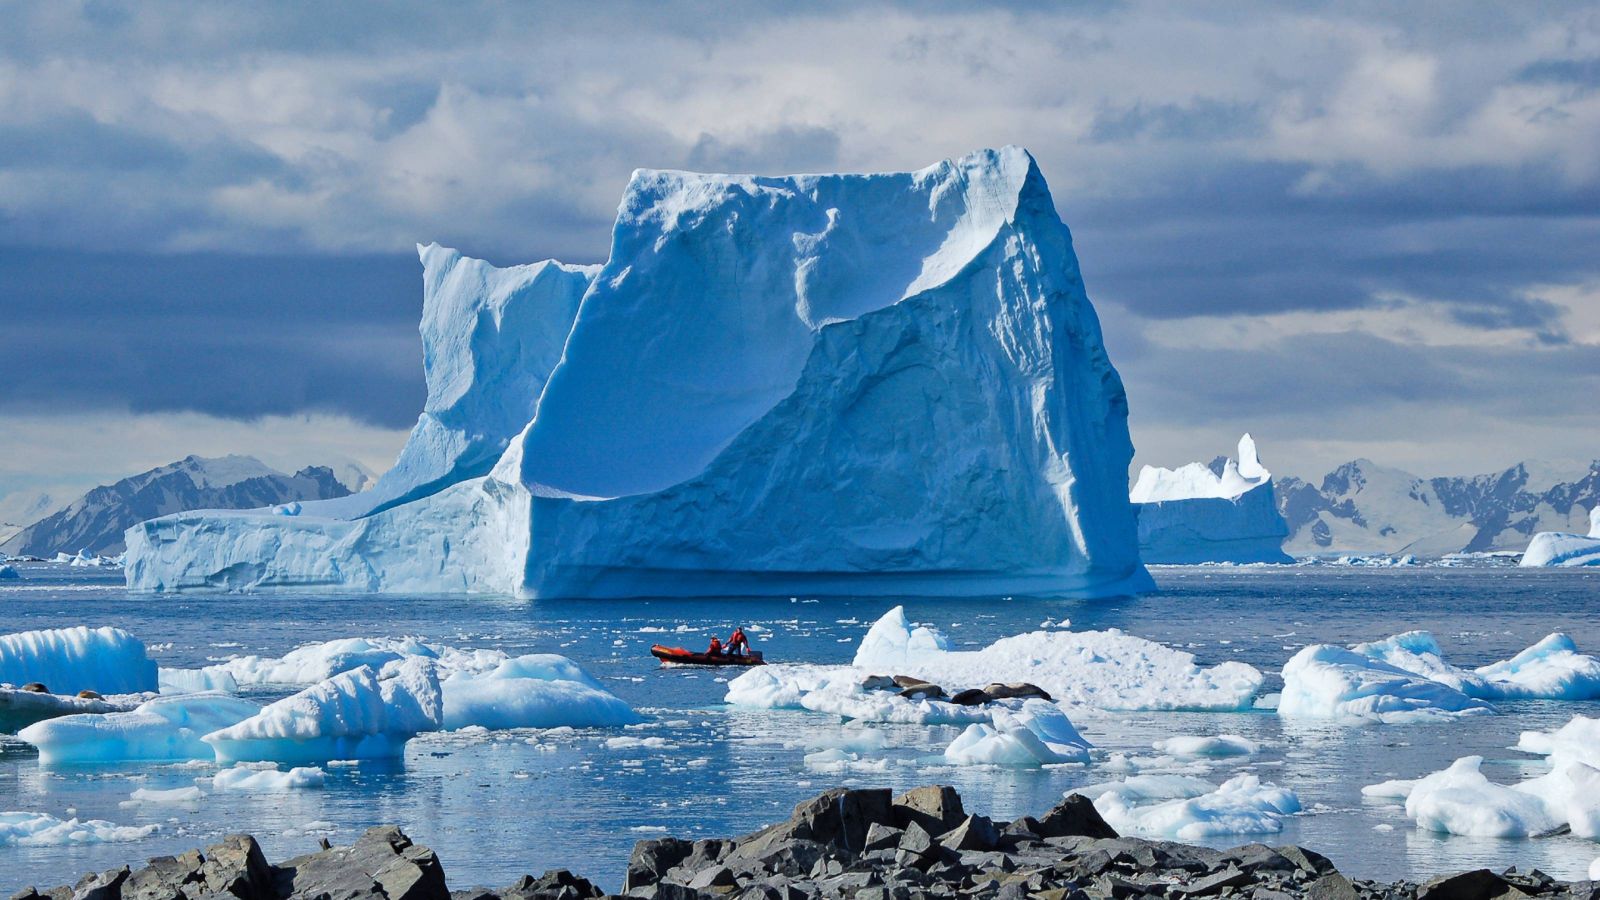 Small boat in water with large iceberg in the background. 